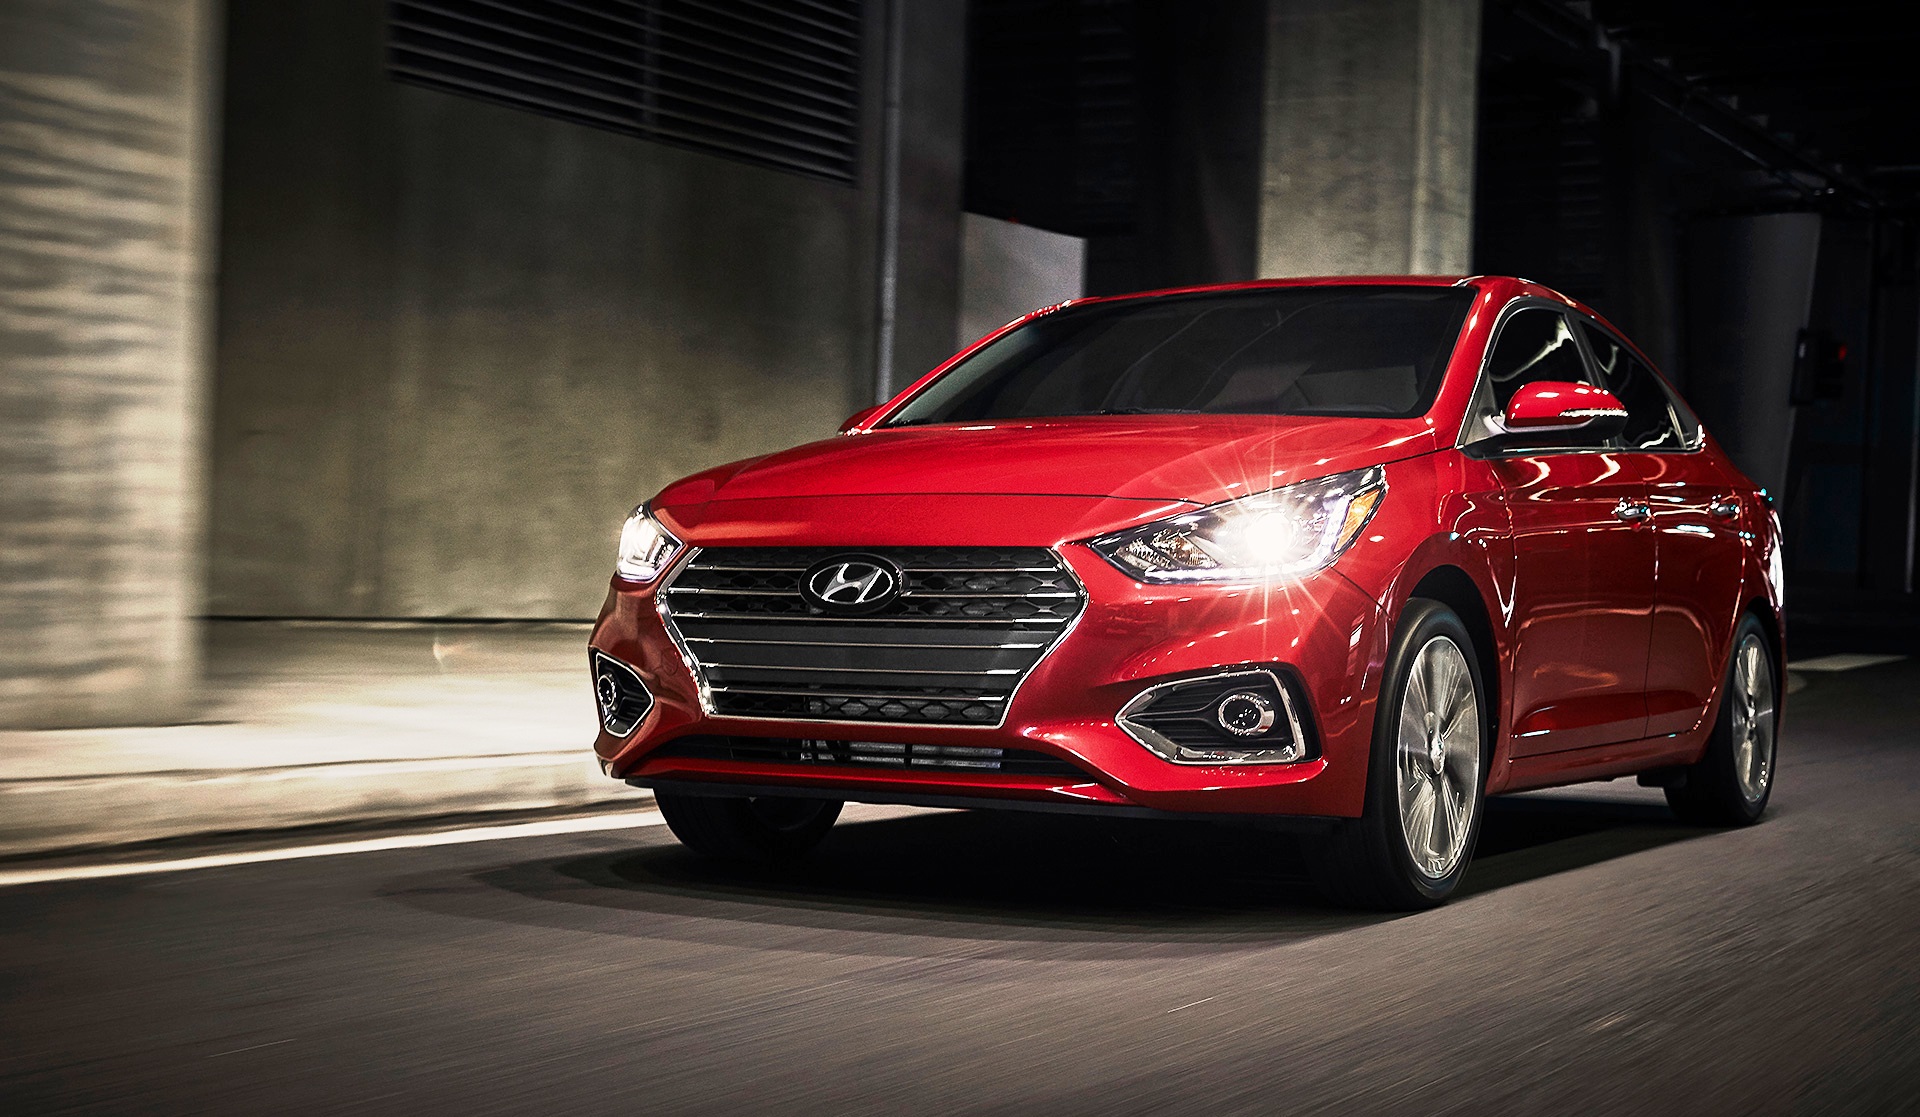 All-New Hyundai Accent to Be Launched Late March